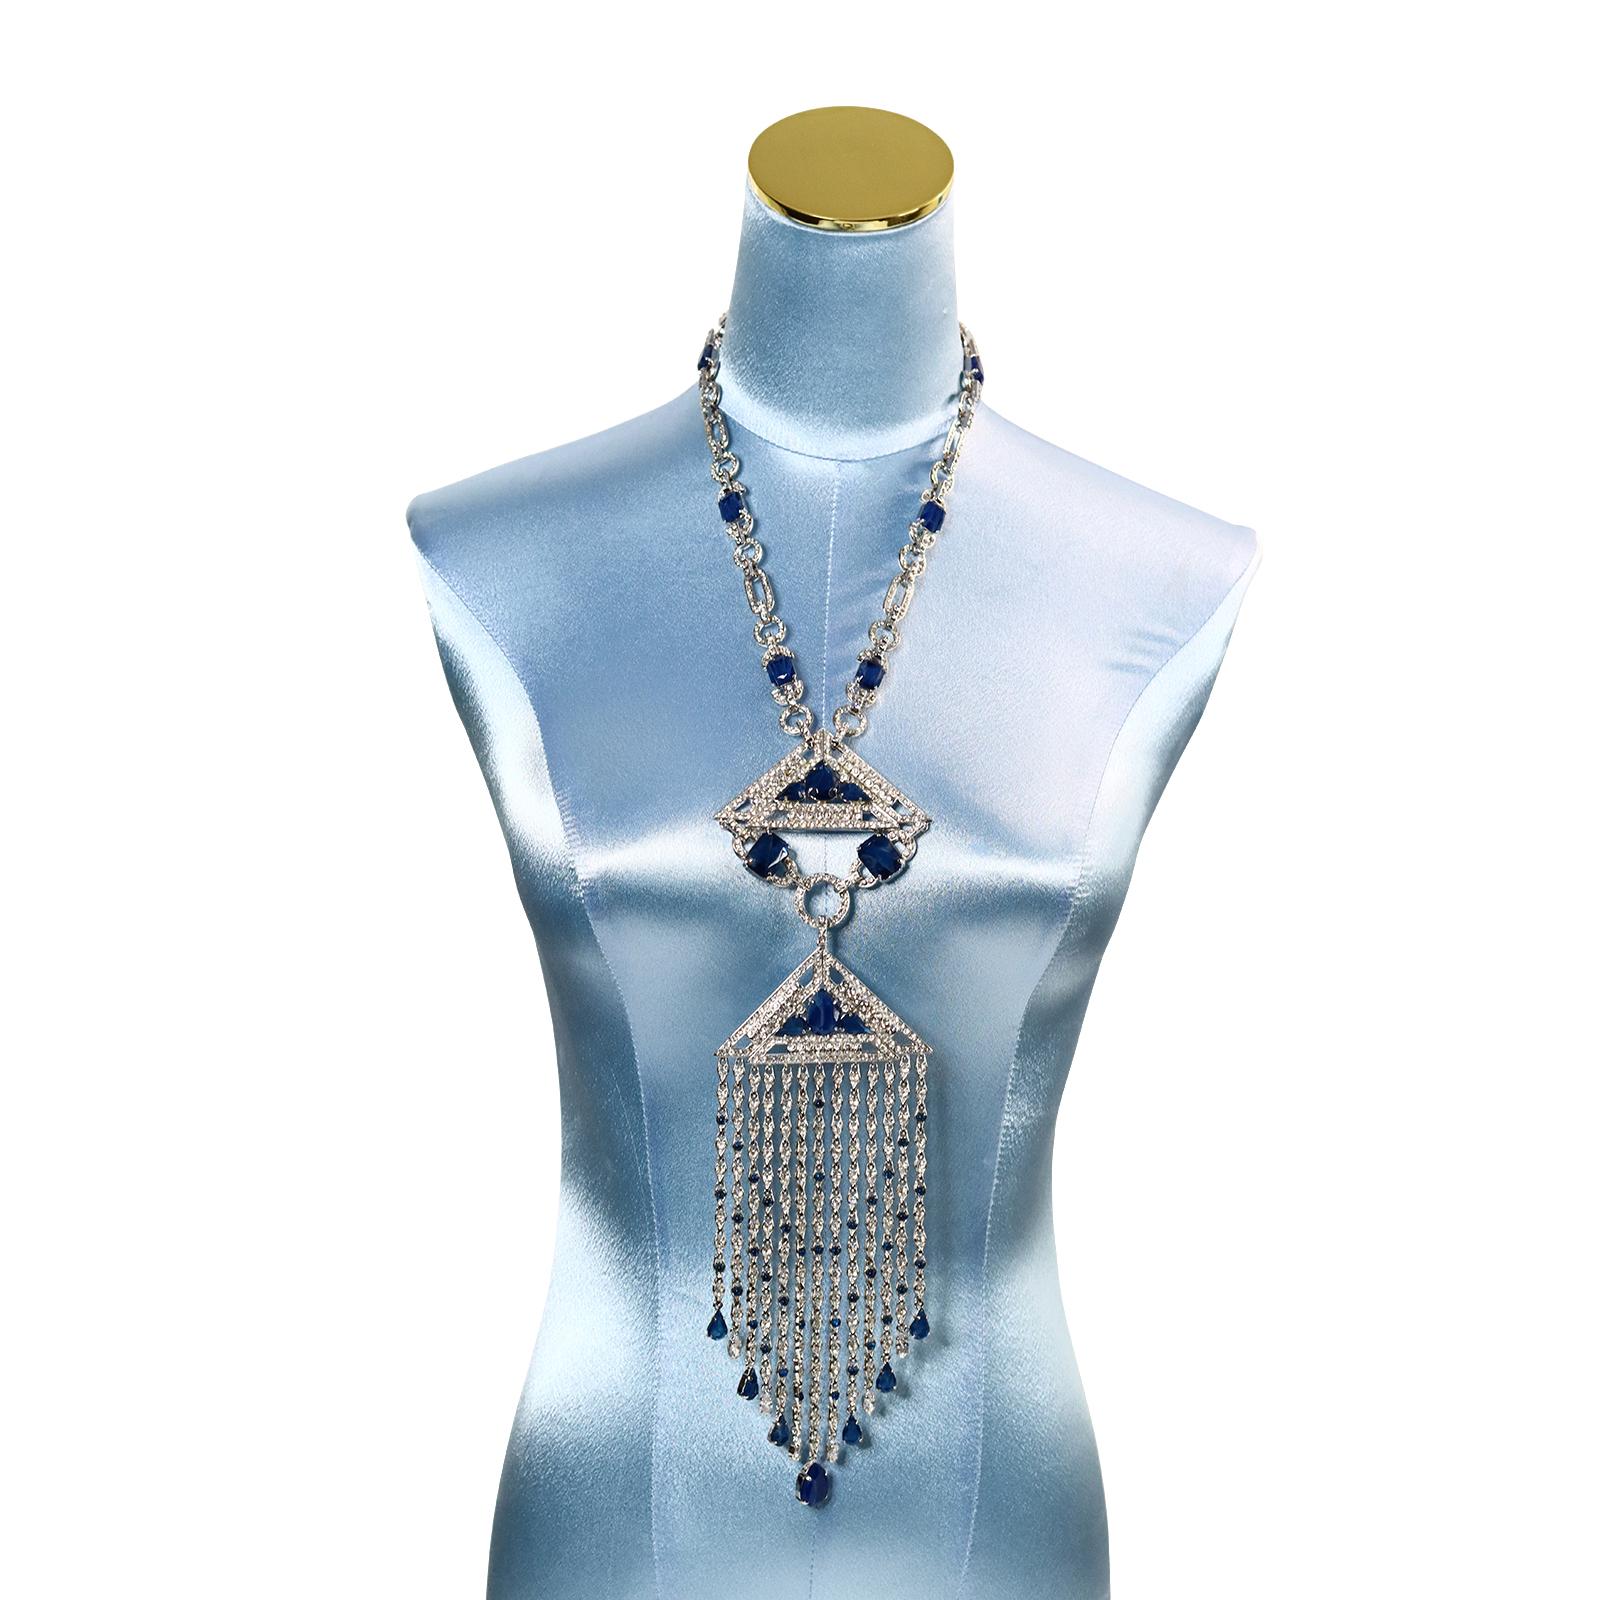 Vintage Carlo Zini Diamante and Blue Cabochon Dangling Necklace Sautoir Circa 2000s. This is one of those Pieces for when you go out or want to stand out.  The photograph doesn't capture the gorgeousness of this piece!!!

The necklace portion is 22